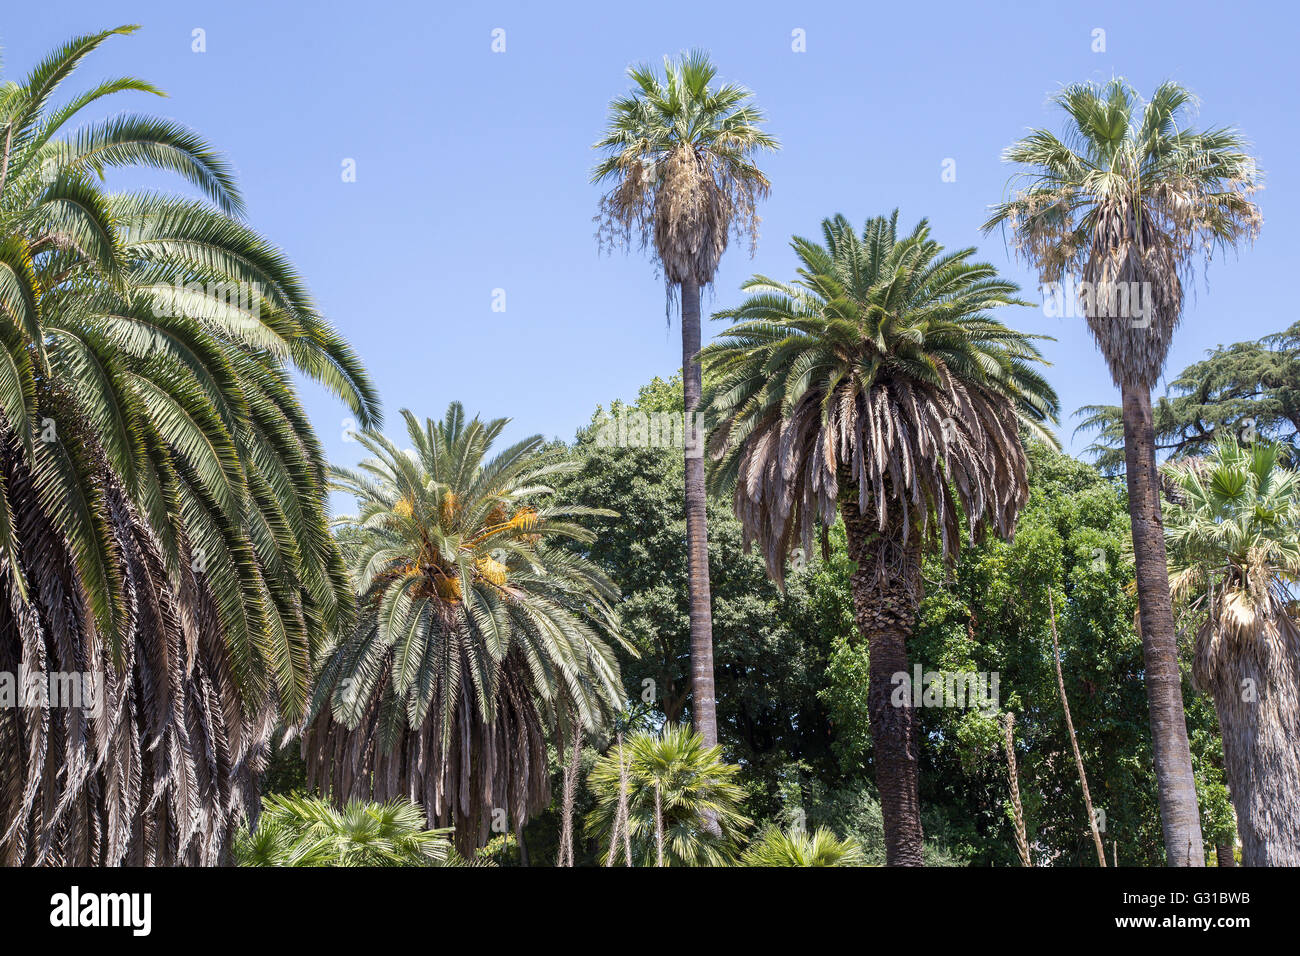 A forest of palm trees in a tropical garden Stock Photo